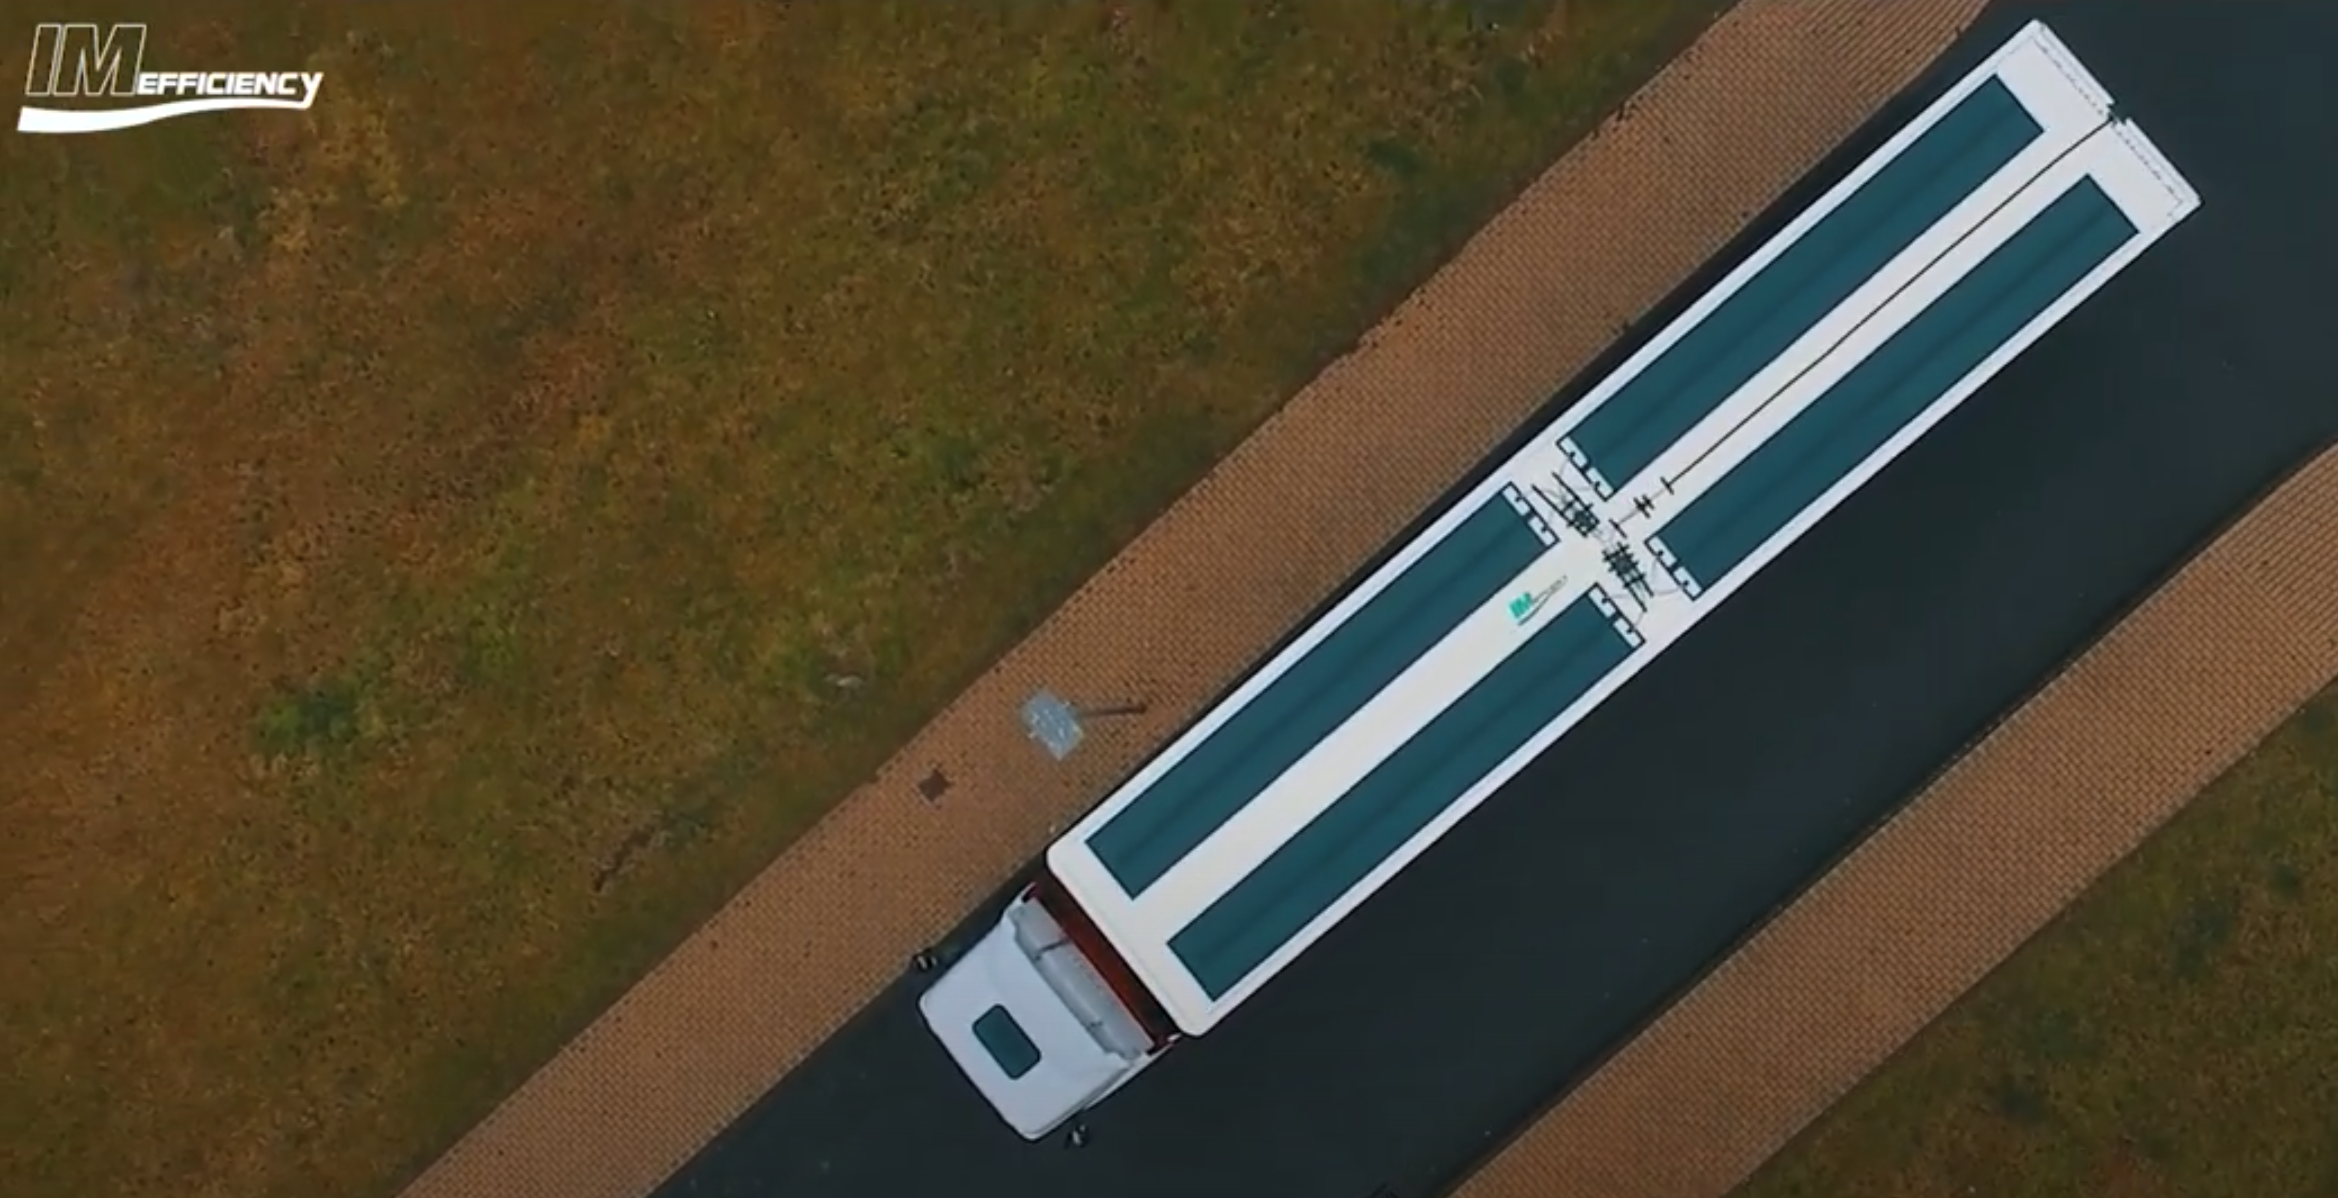 Belgian-Dutch start-up covers truck trailers with solar panels